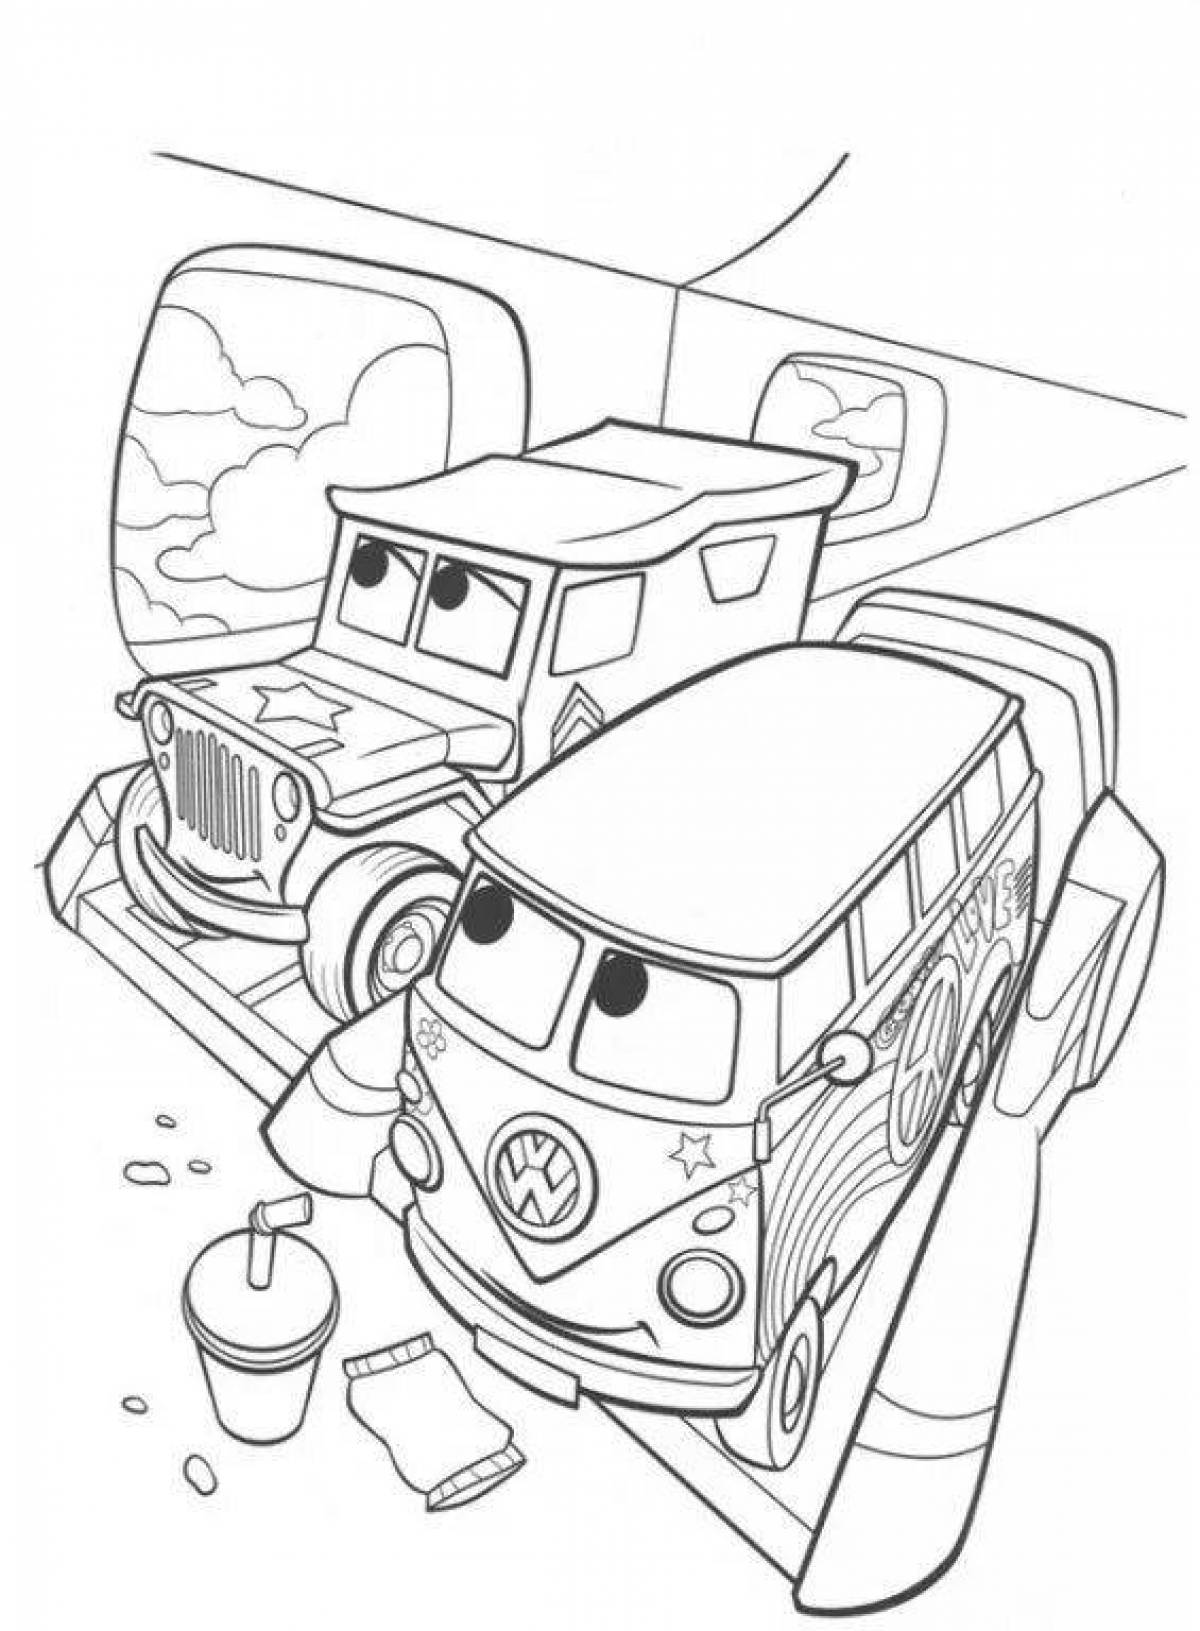 Fancy cars 2 coloring book